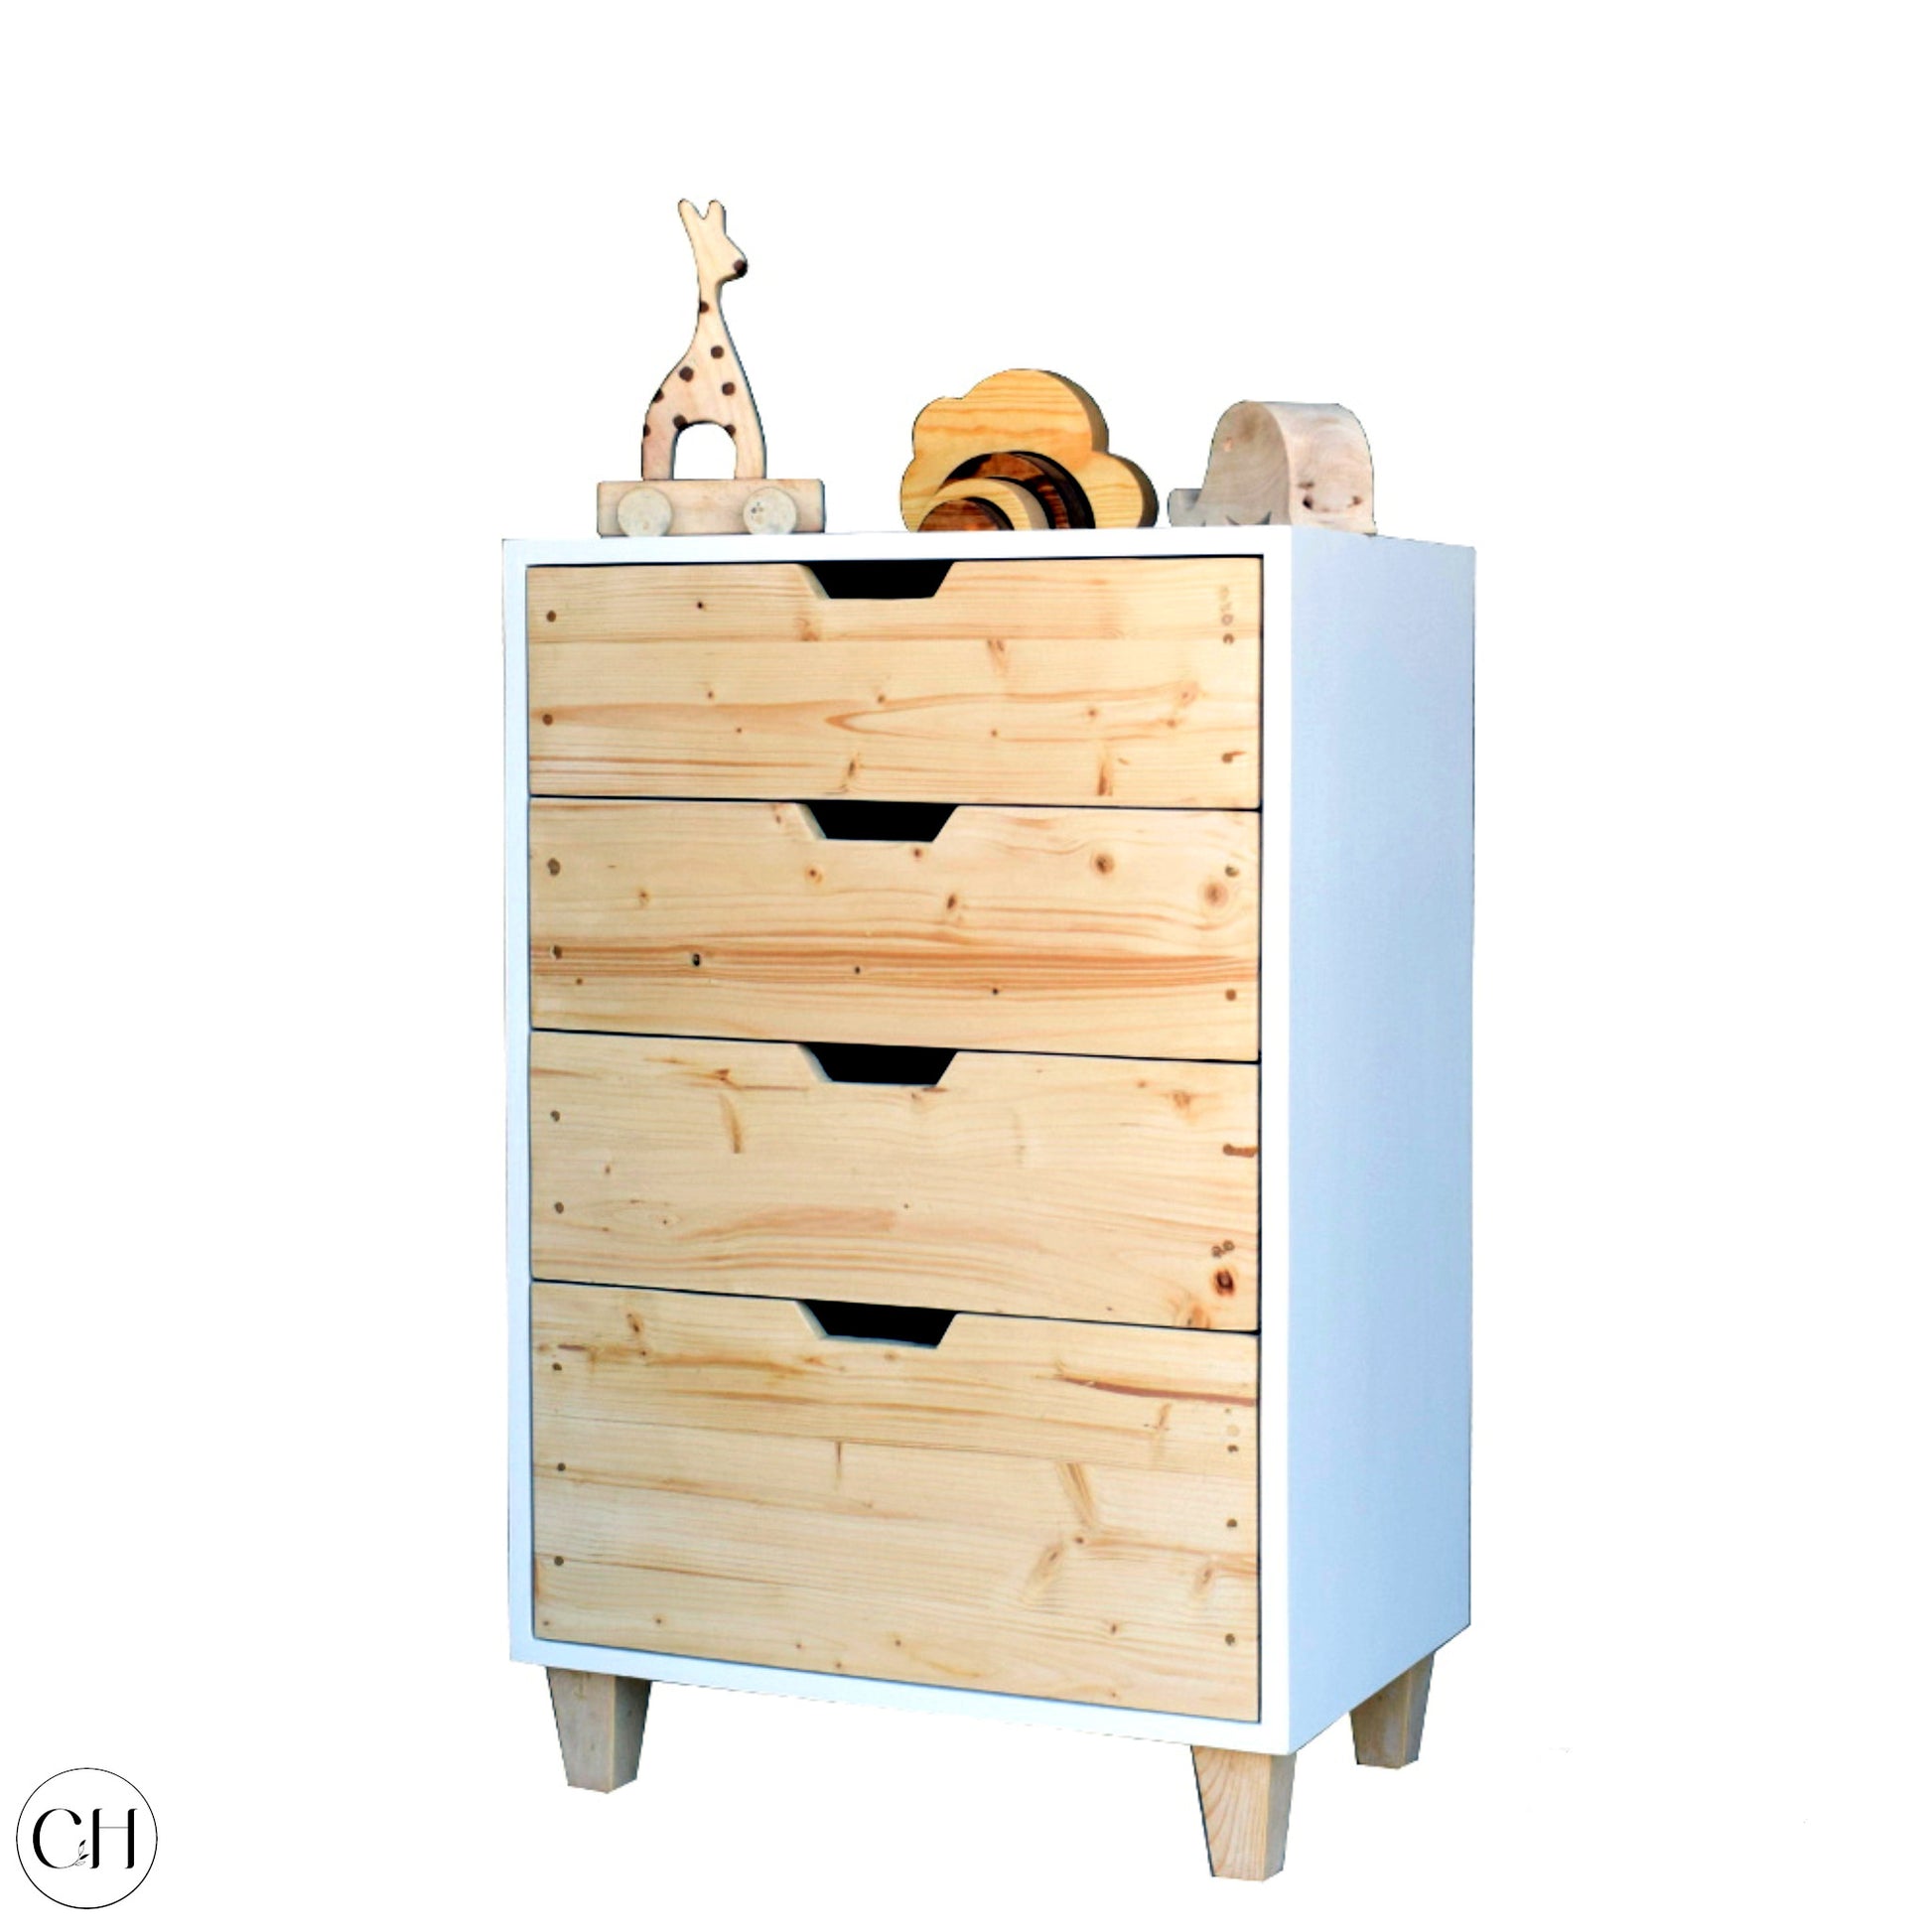 CustHum - Compact chest of drawers without handles, white and wood finish, displaying wooden toys on top